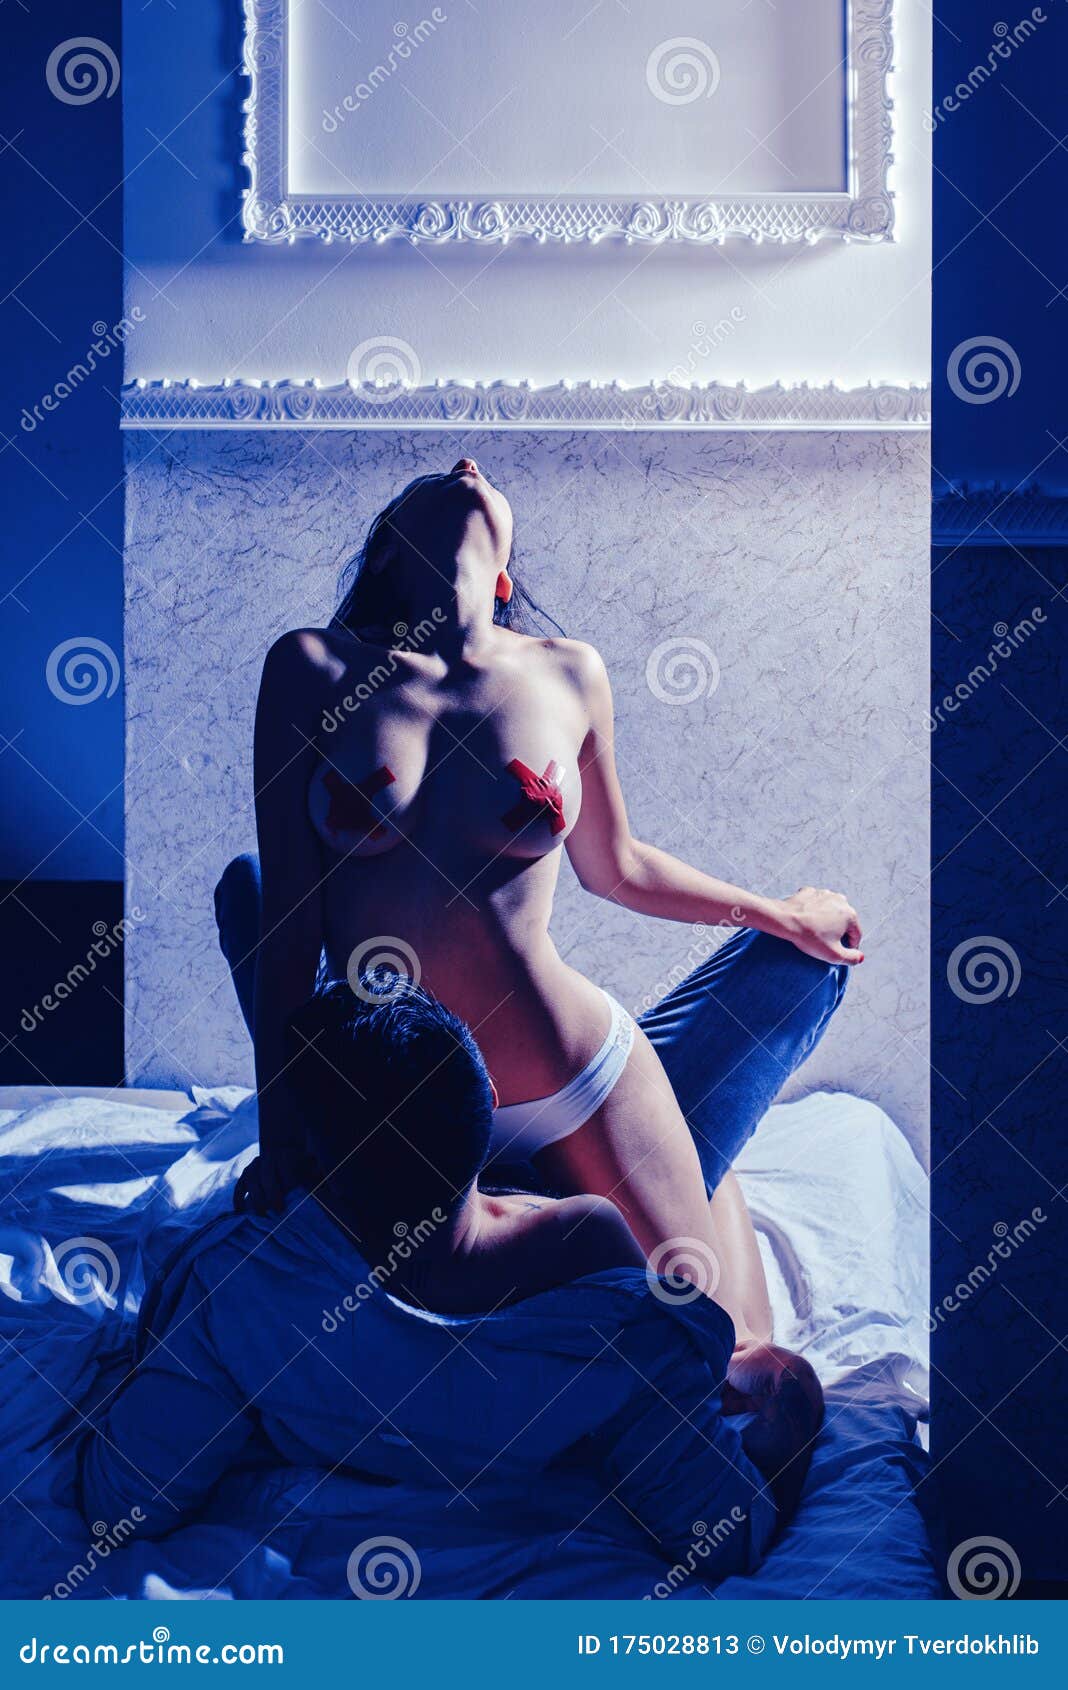 Couple in Bed. Human Sexual Activity. really Man Having Sex with Girl without Sexual Dress picture